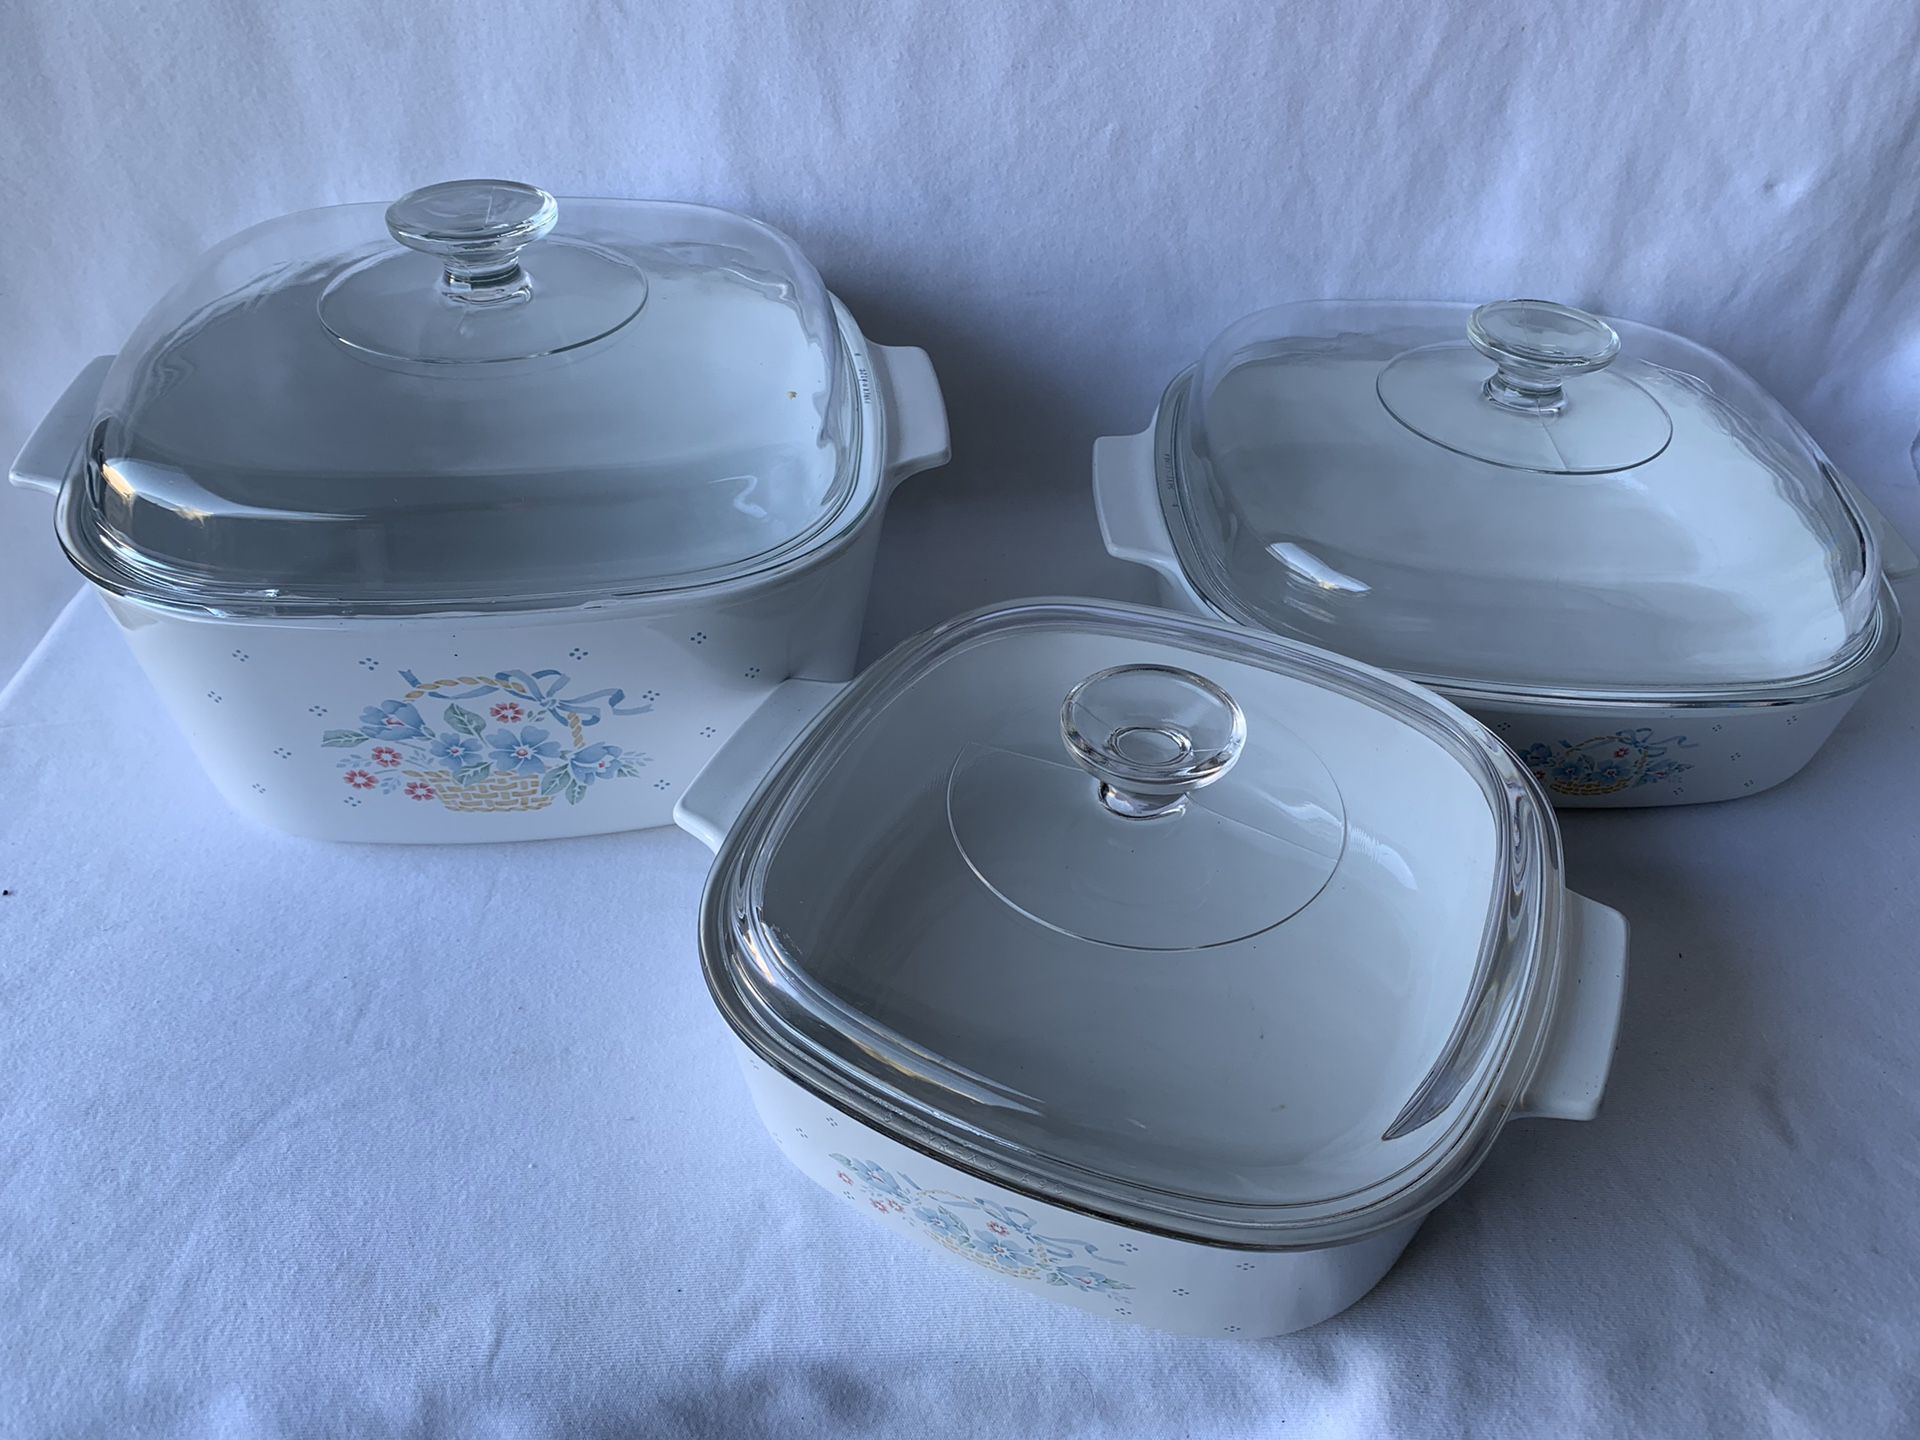 3 Corning ware with glass Pyrex lids